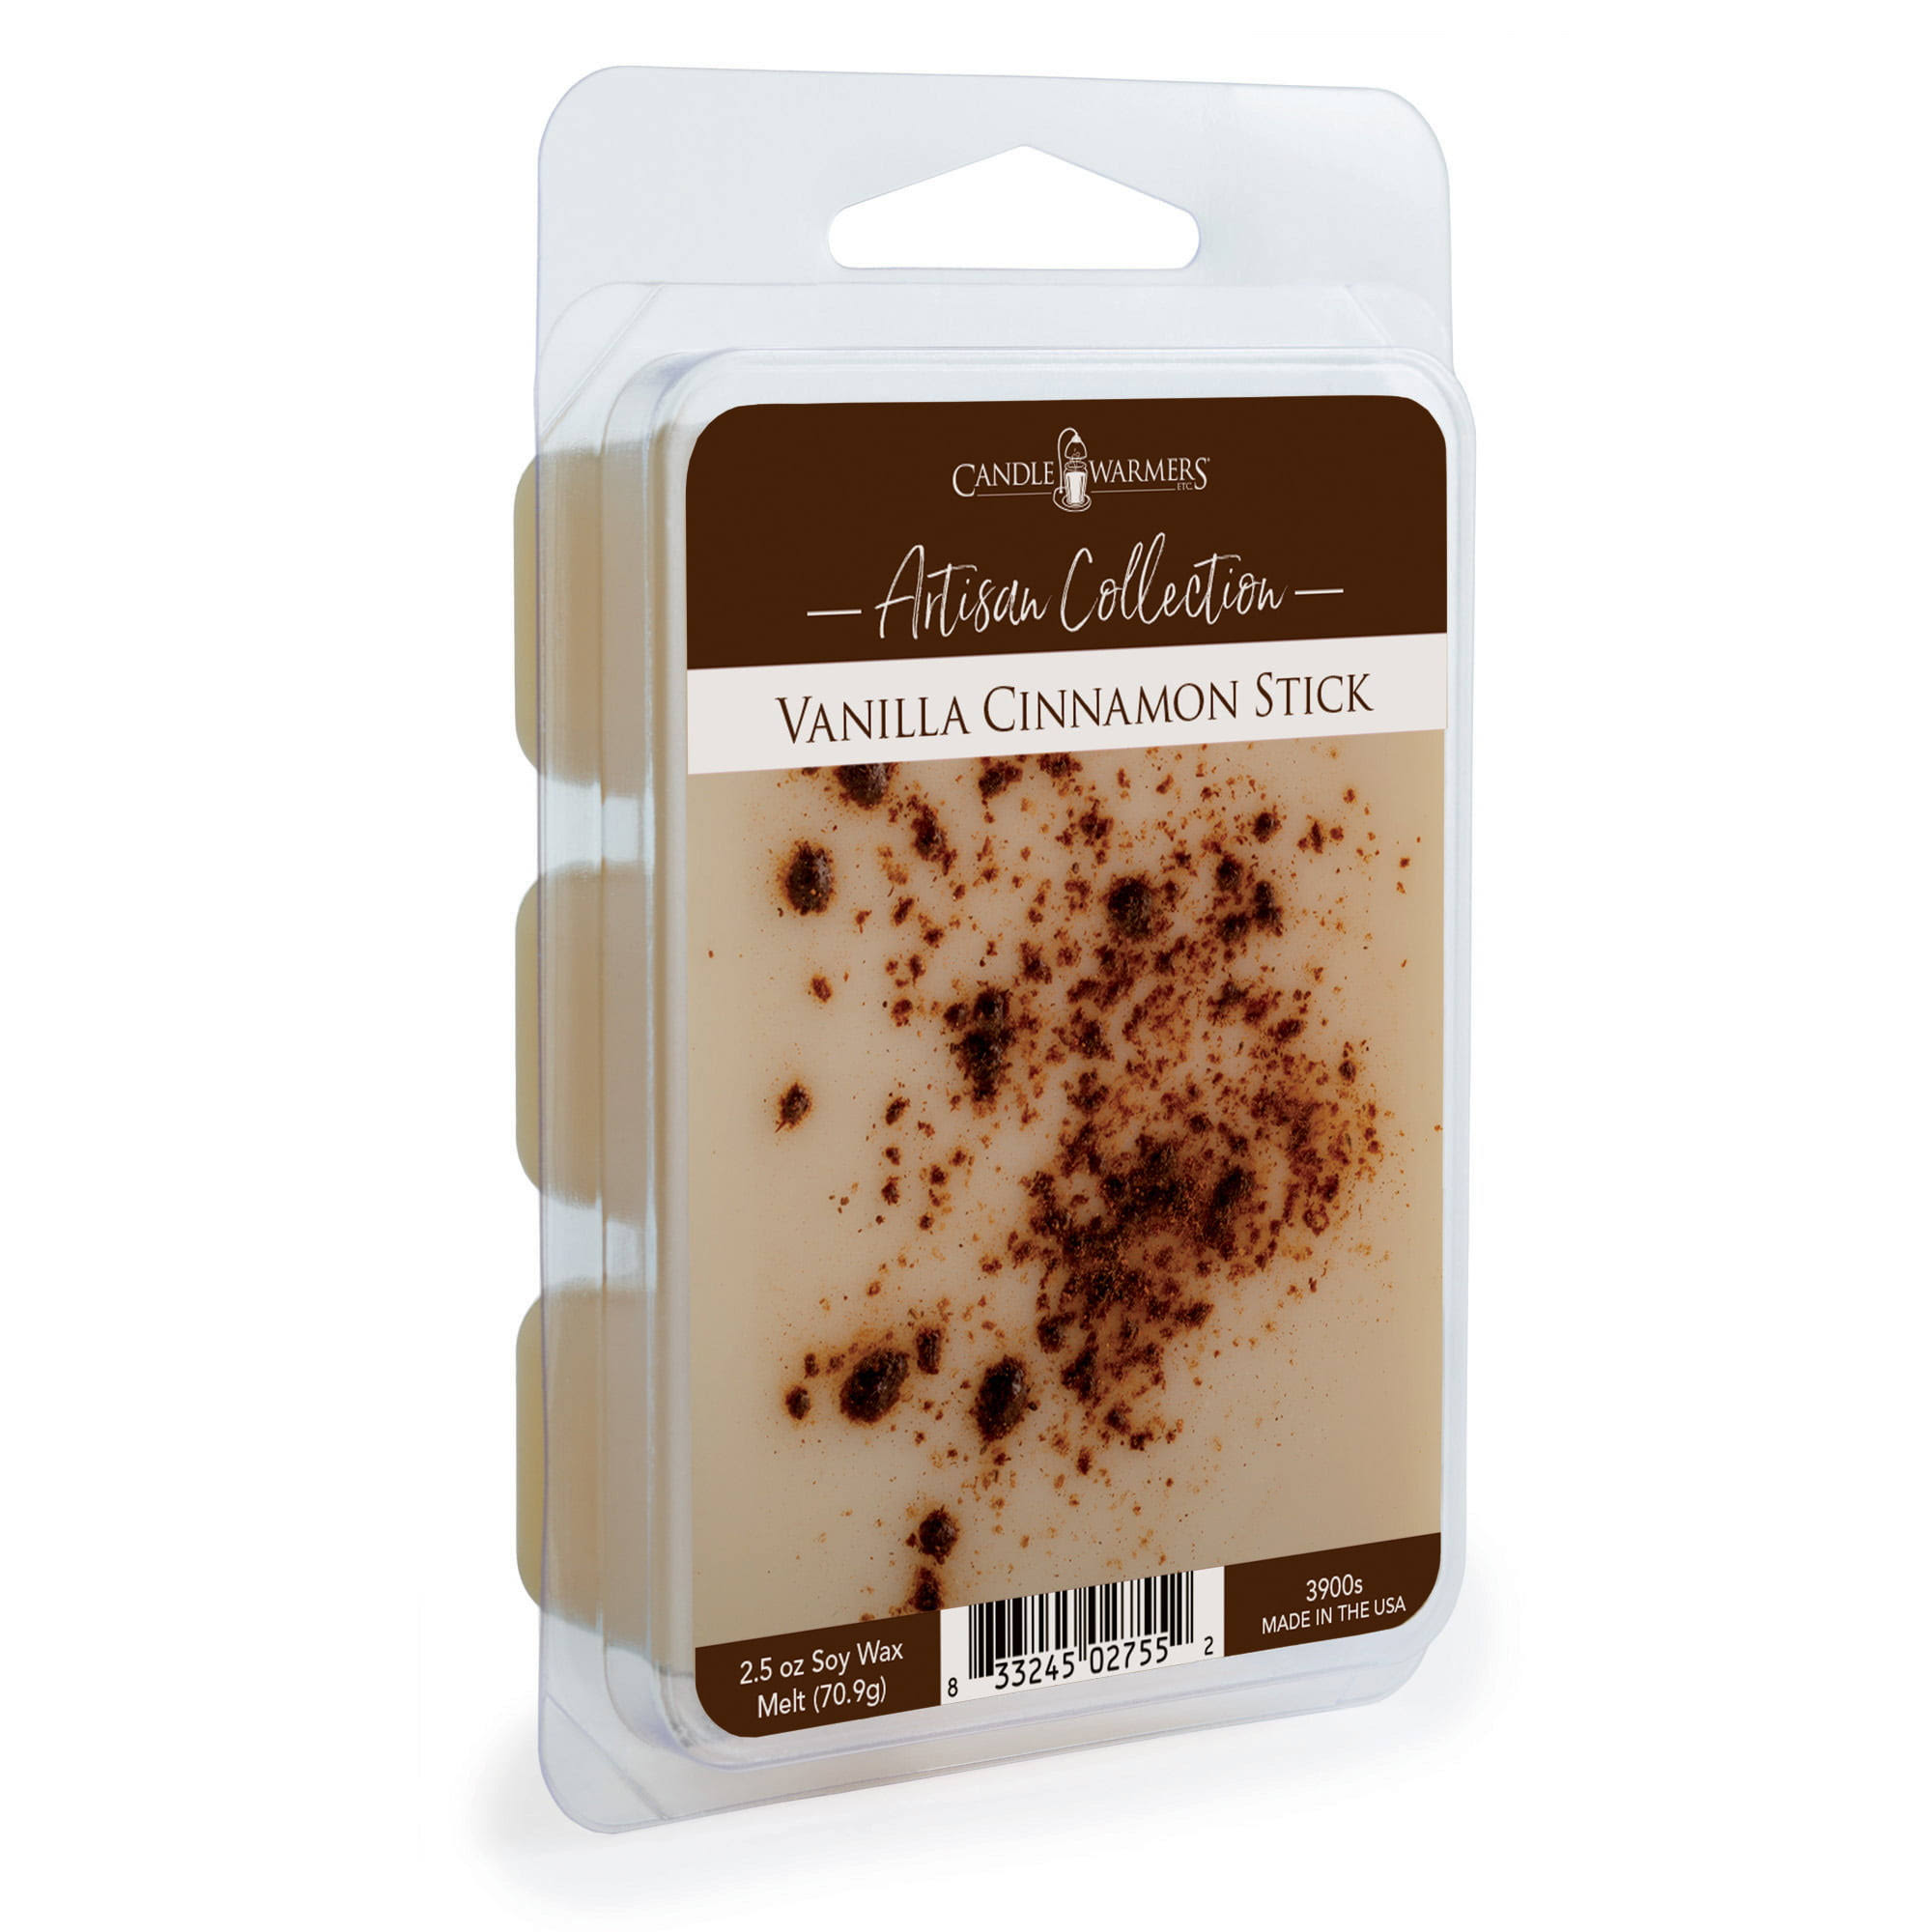 Place & Time Candle Warmers Artisan Vanilla Cinnamon Stick Scented Soy Wax Melts